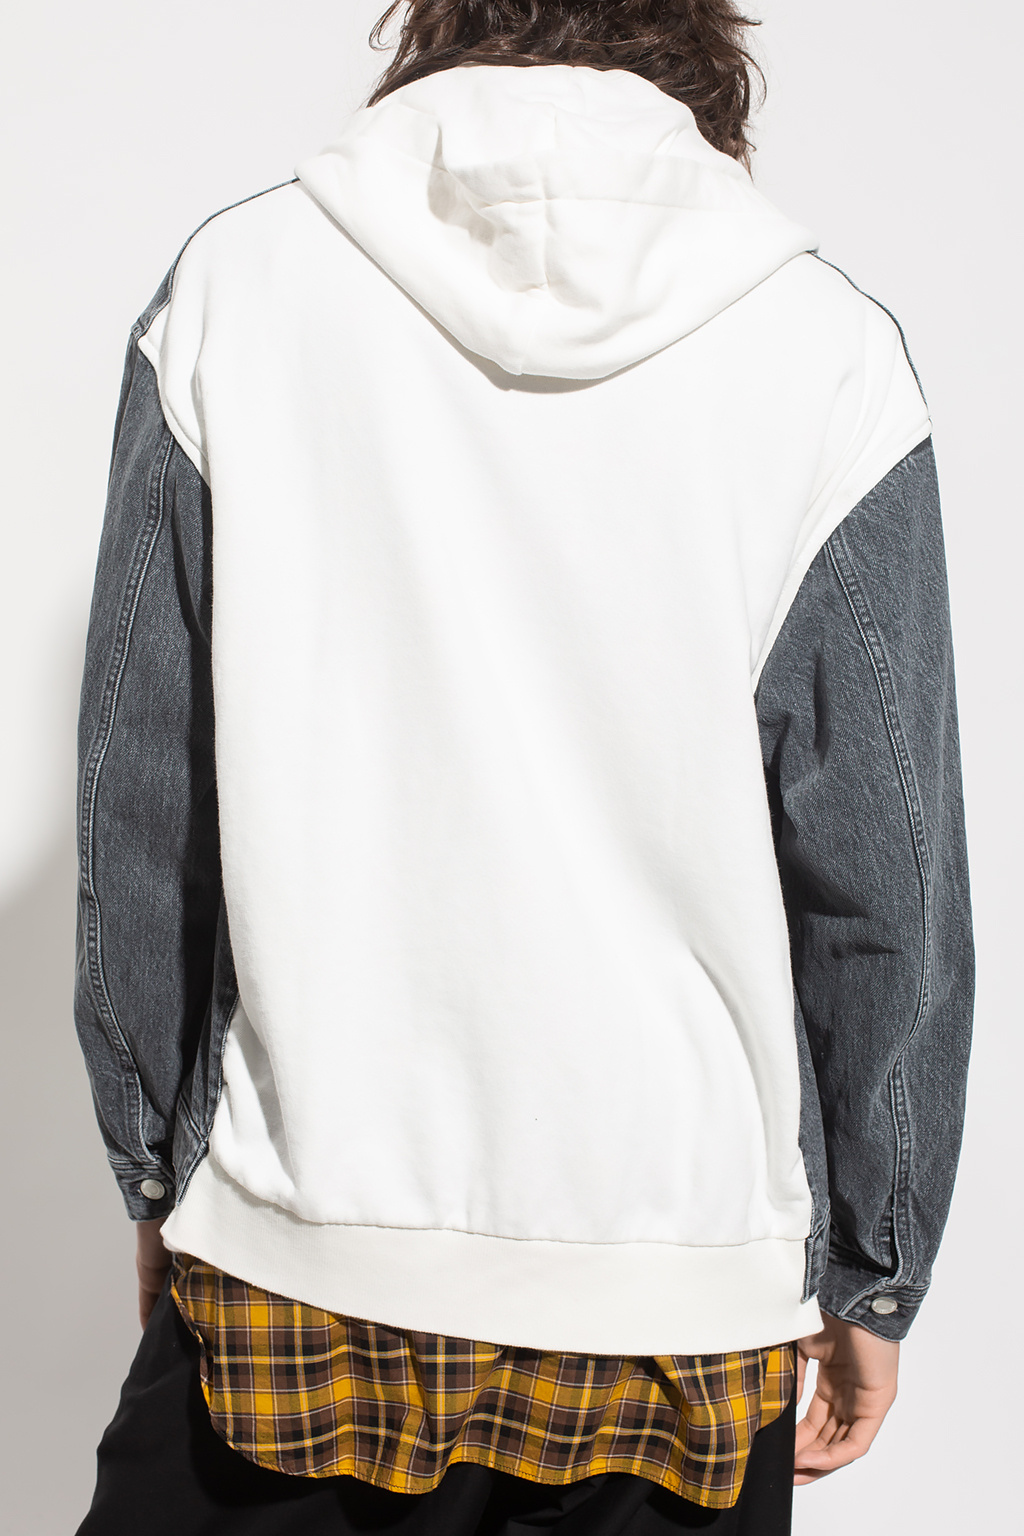 Undercover Hooded Religion jacket